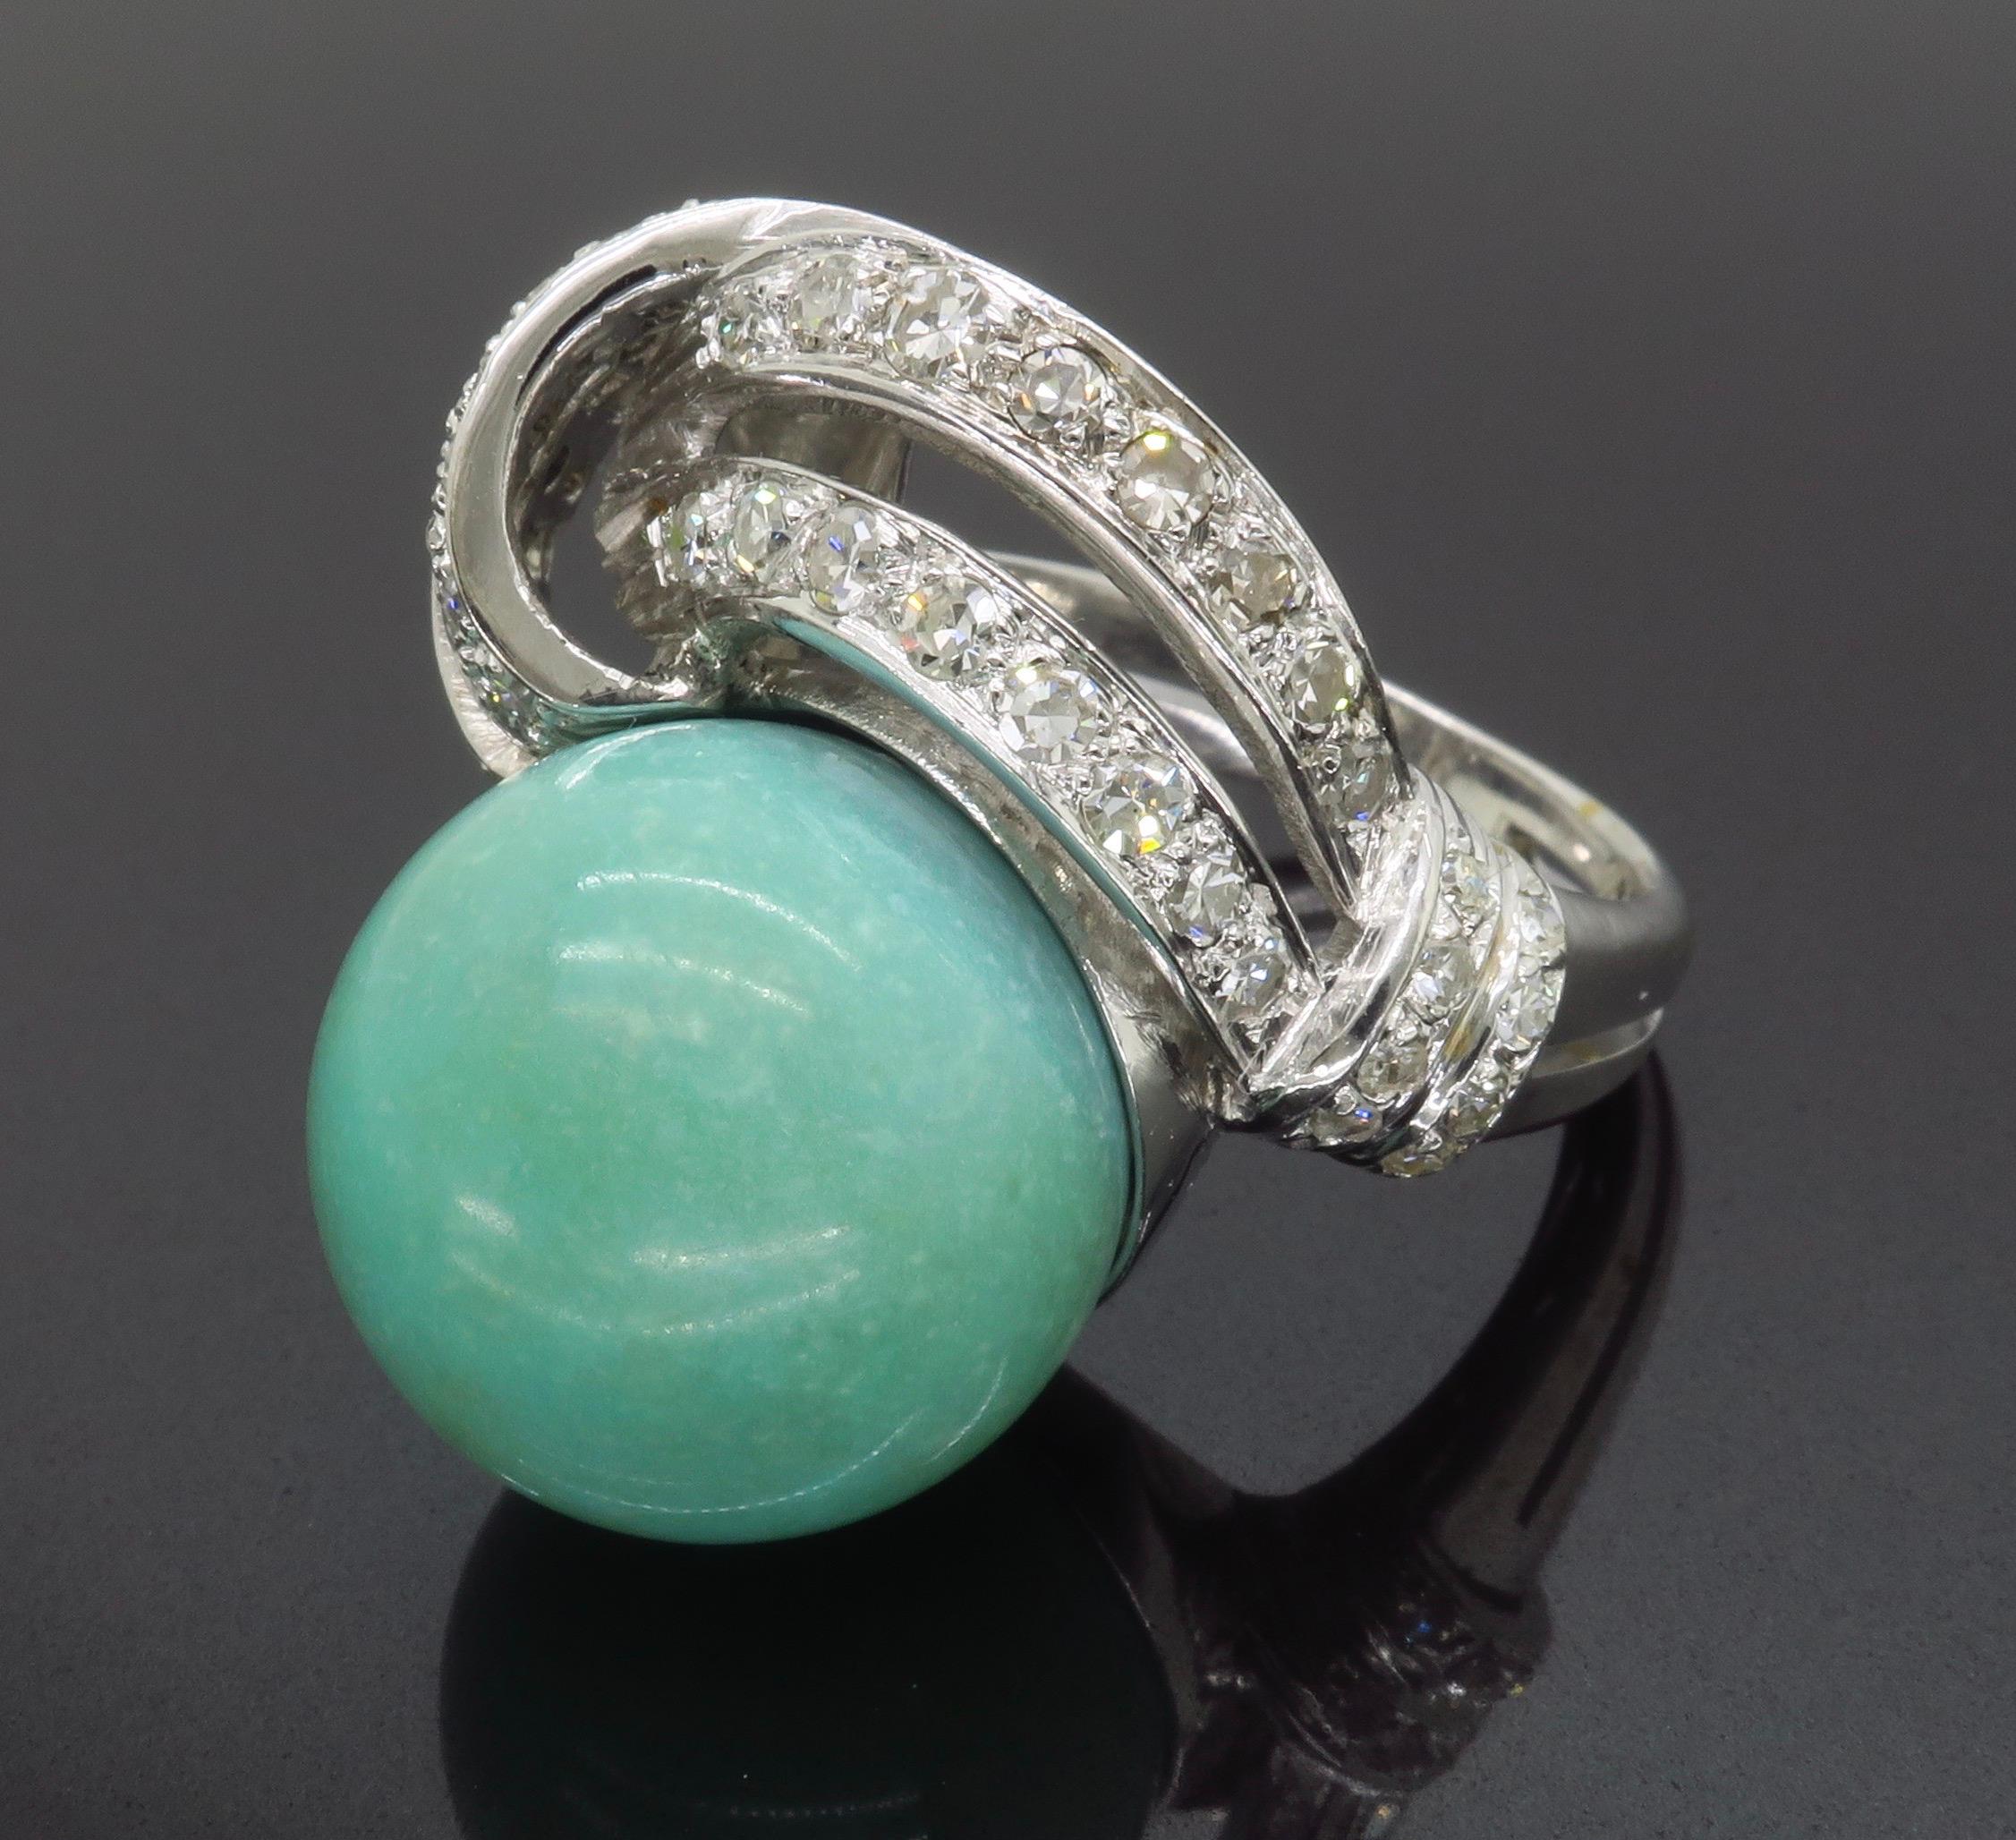 Incredible opaque Chalcedony ring surrounded by diamonds set in 14k white gold. 

Gemstone: Chalcedony 
Gemstone Measurements: 16-24mm circular 
Diamond Carat Weight: 1.50CTW
Average Color: F-G
Average Clarity: VS-SI
Metal: 14k White Gold